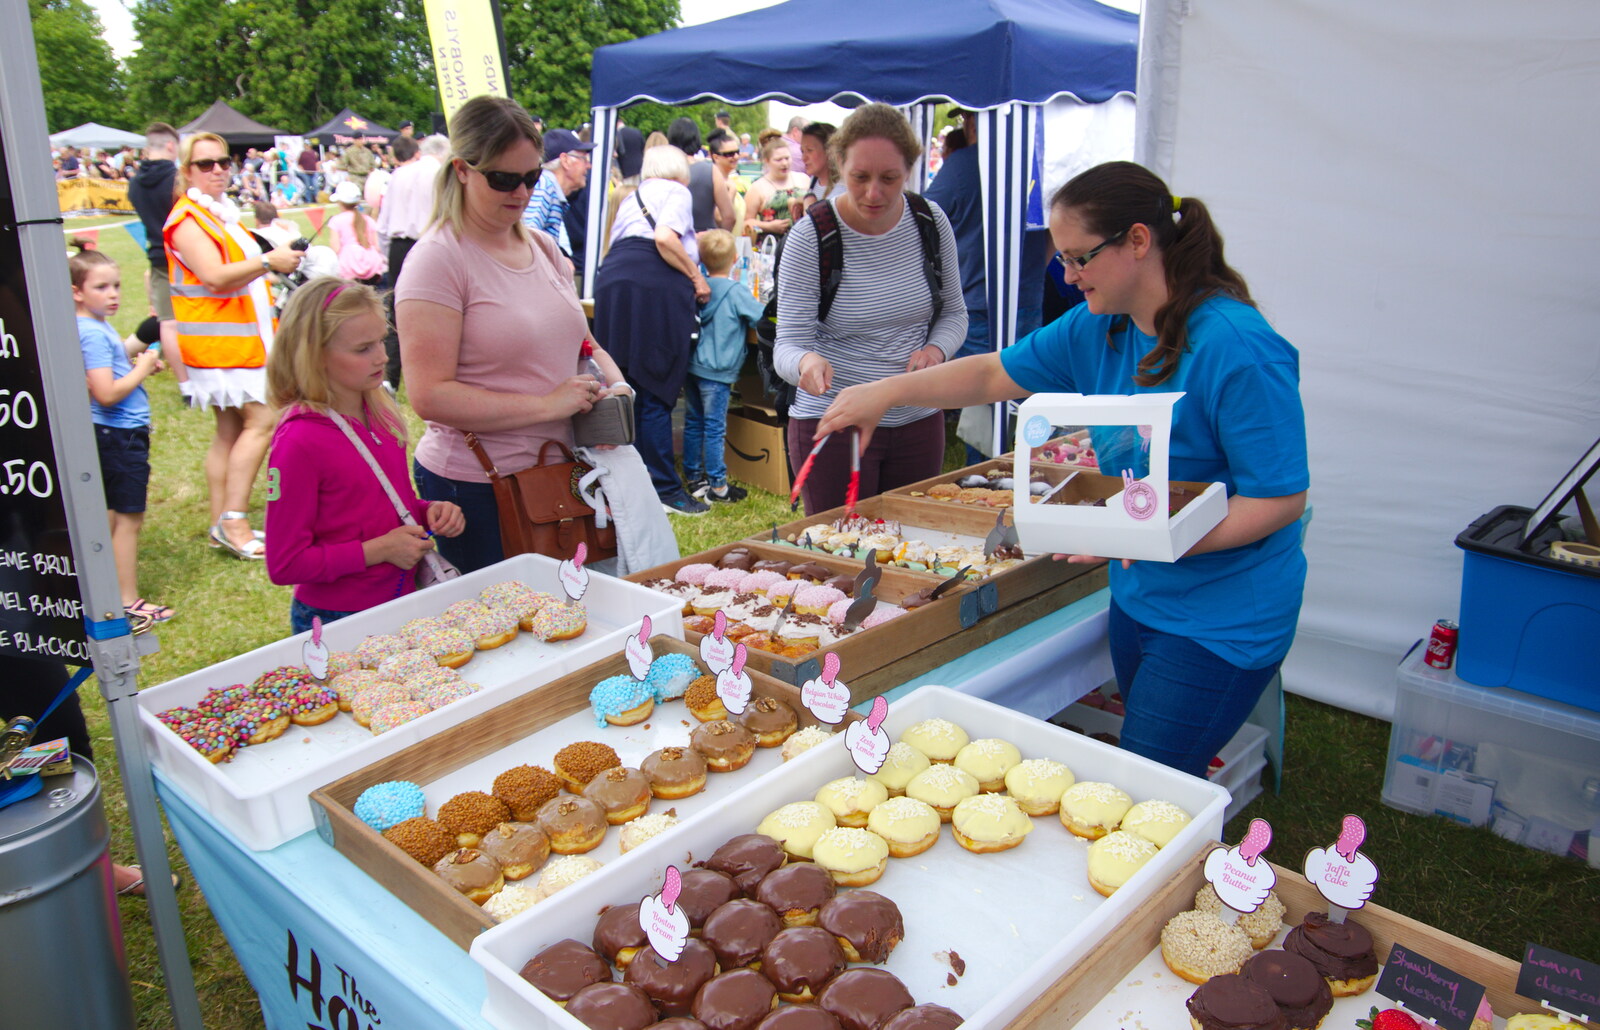 A  doughnut shop, at £1.50 a pop, does a good trade from The Diss Carnival 2019, Diss, Norfolk - 9th June 2019